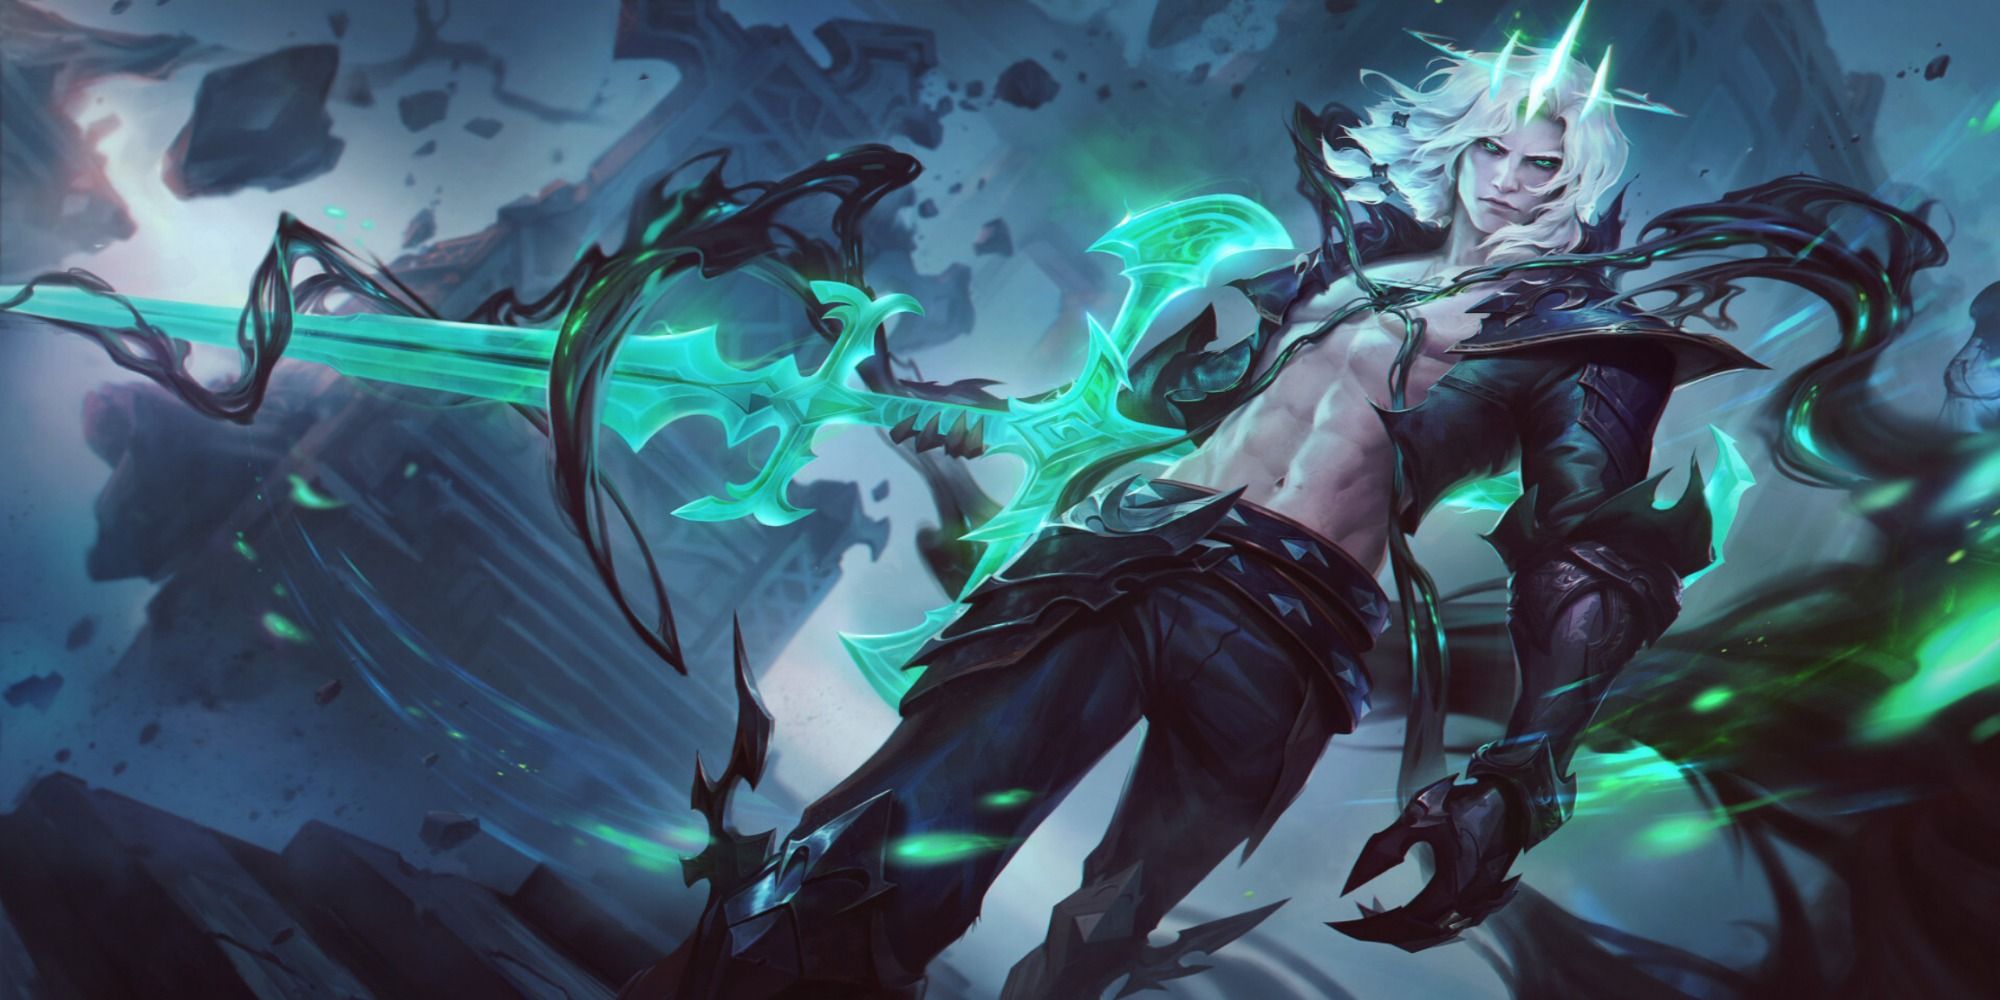 Riot Forge on X: 📜A Message For All Lore Enthusiasts:📜 Ruined King: A  League of Legends Story is the origin story of Viego and how he manifested  into the world of Runeterra.